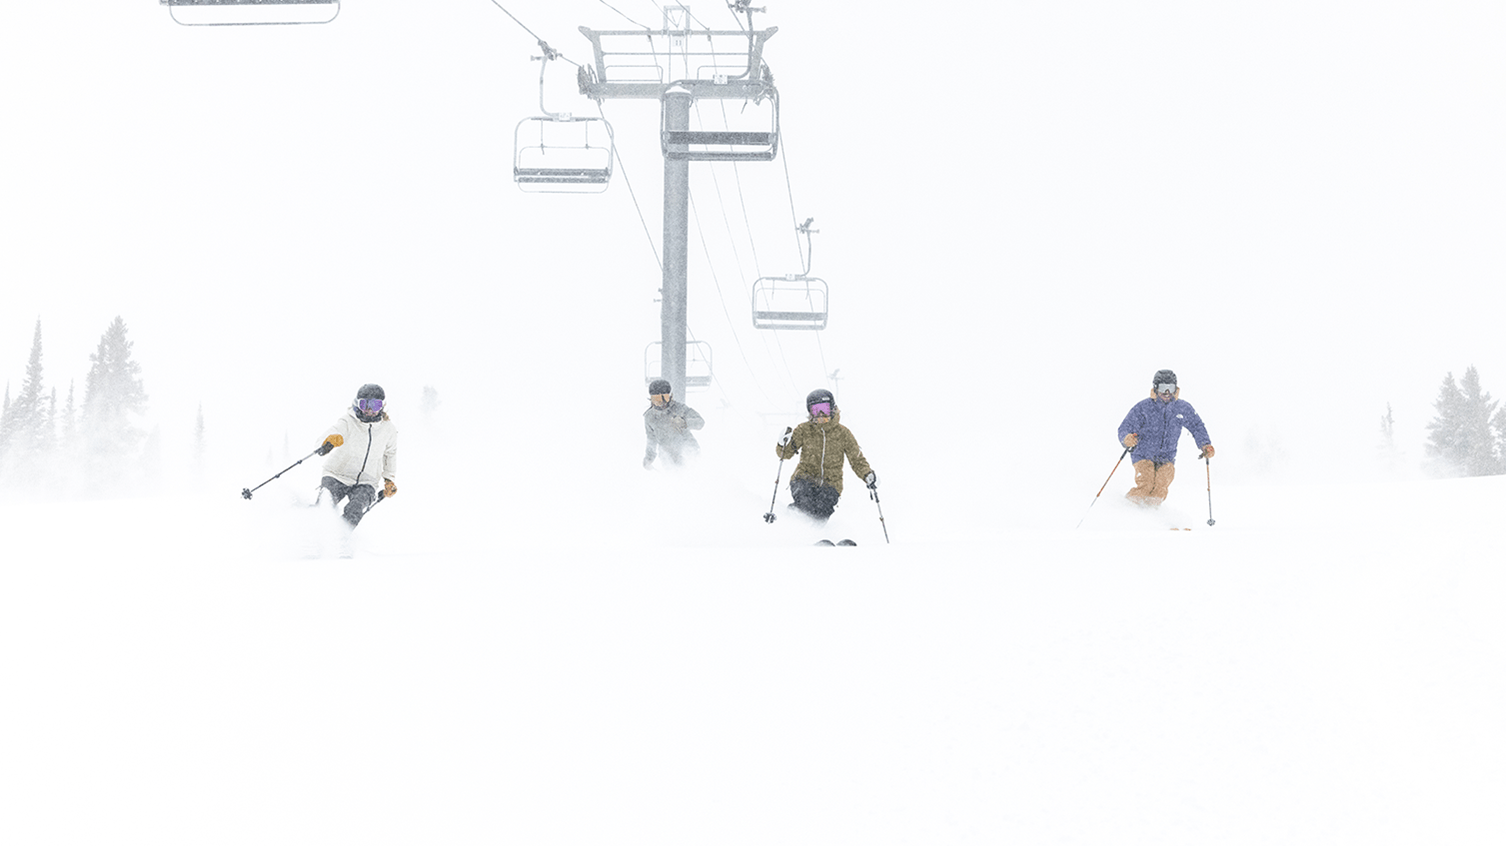 Four skiers under the big burn lift at Aspen Snowmass, cloudy day with deep powder